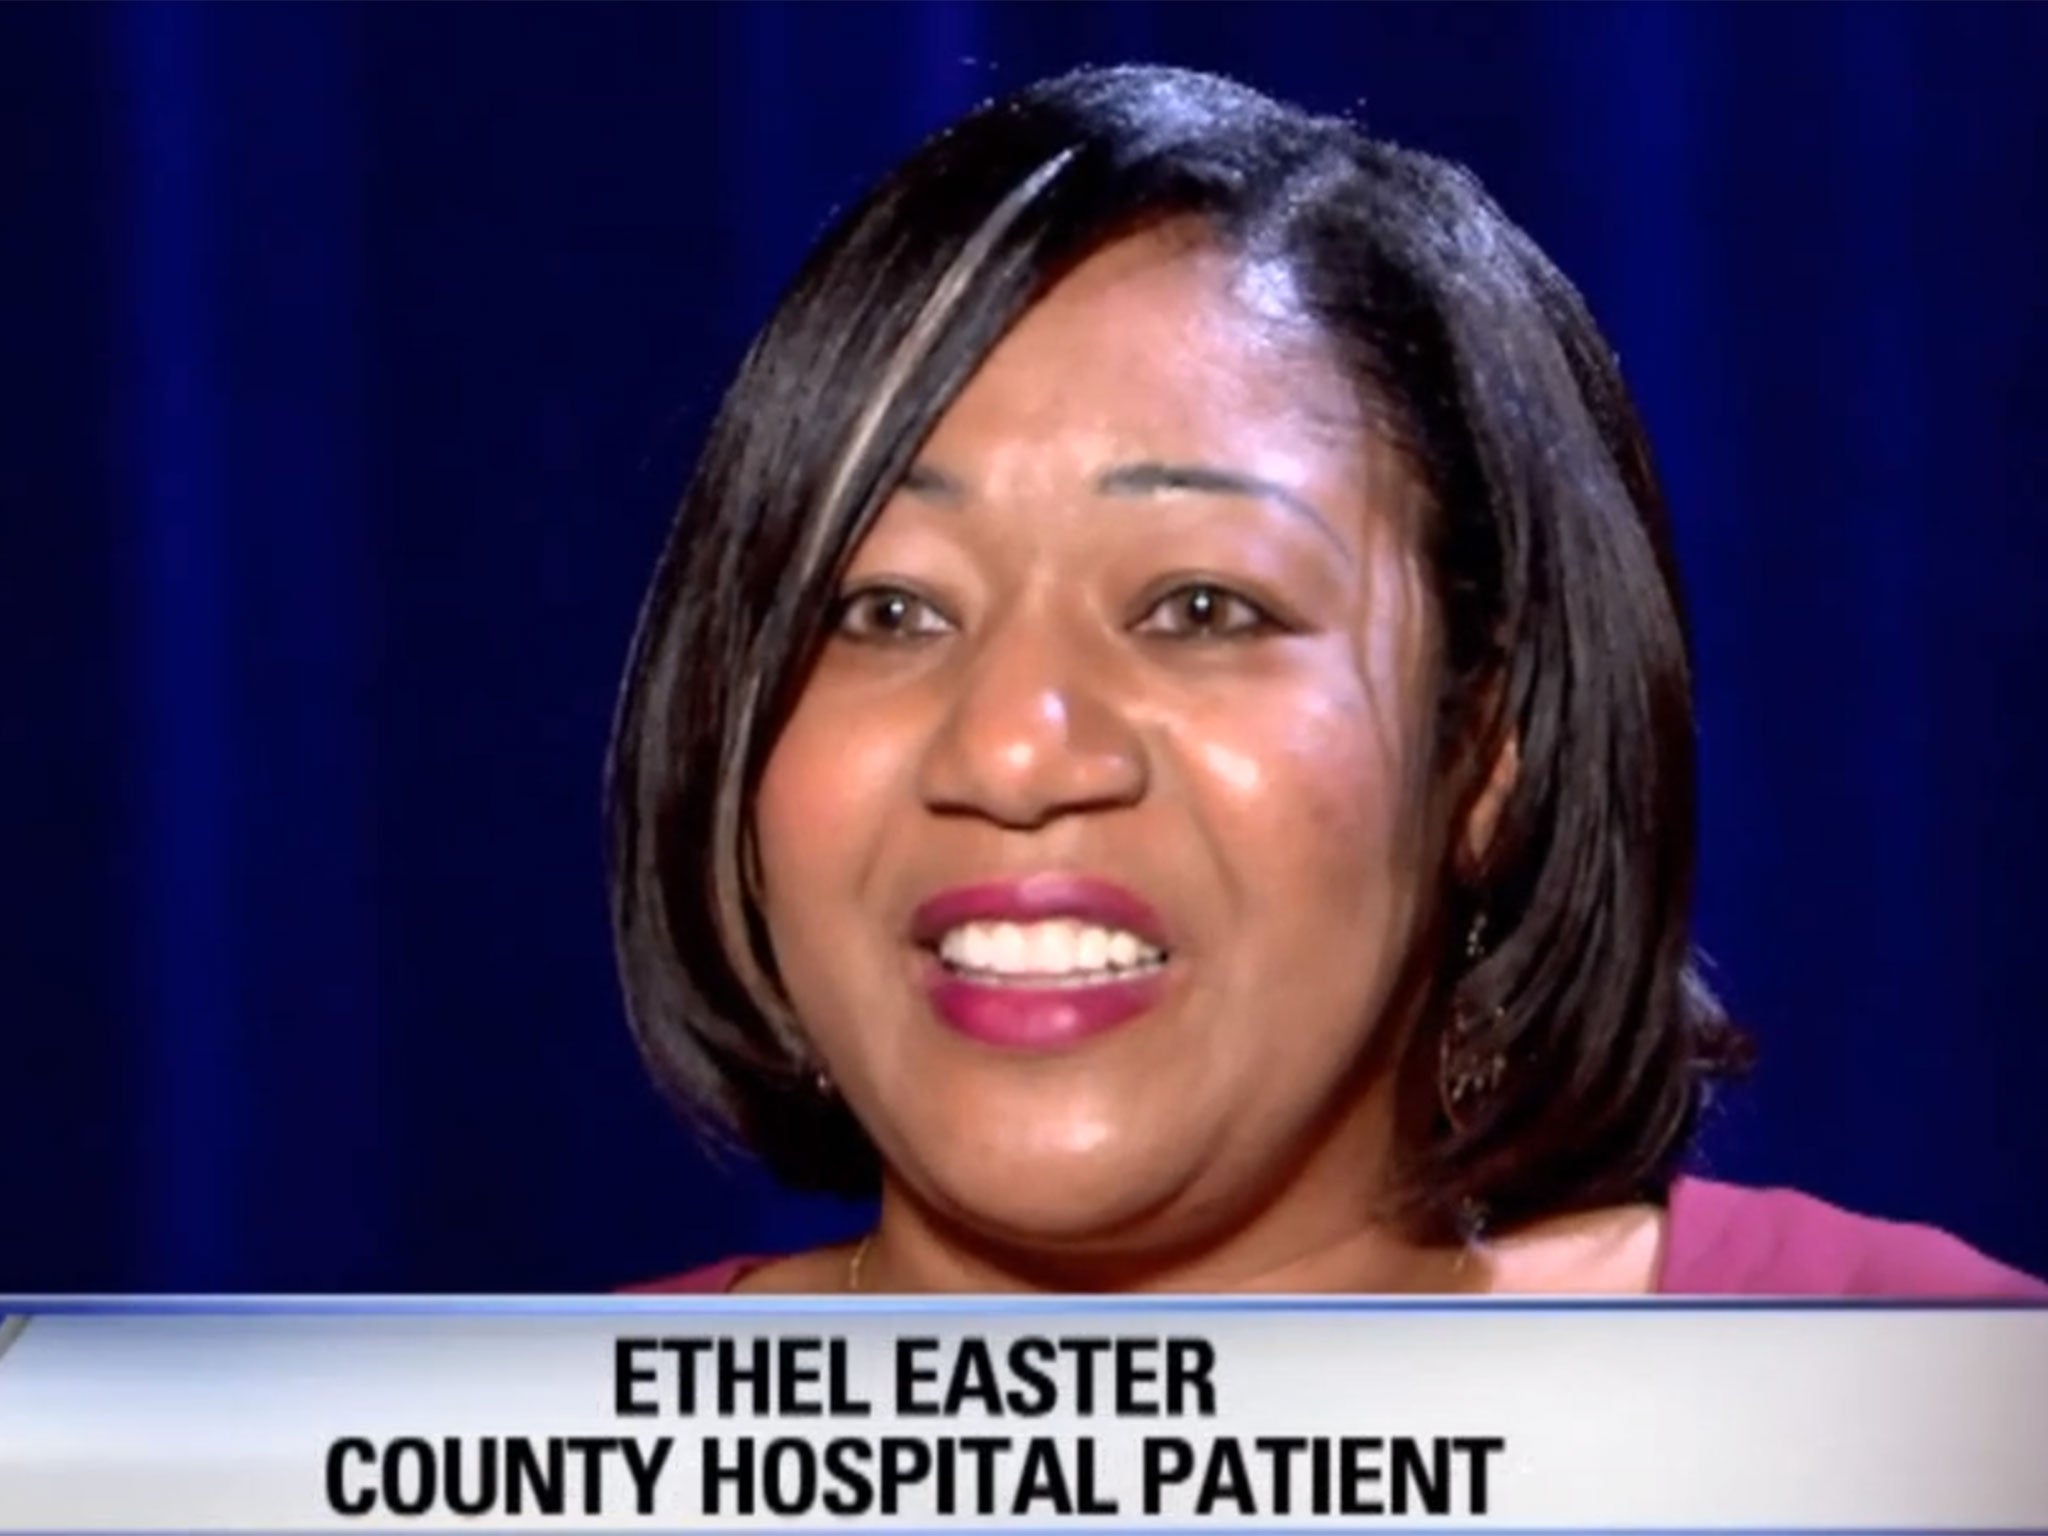 Ethel Easter told Fox26 she secretly recorded her surgery after an upsetting meeting with her doctor